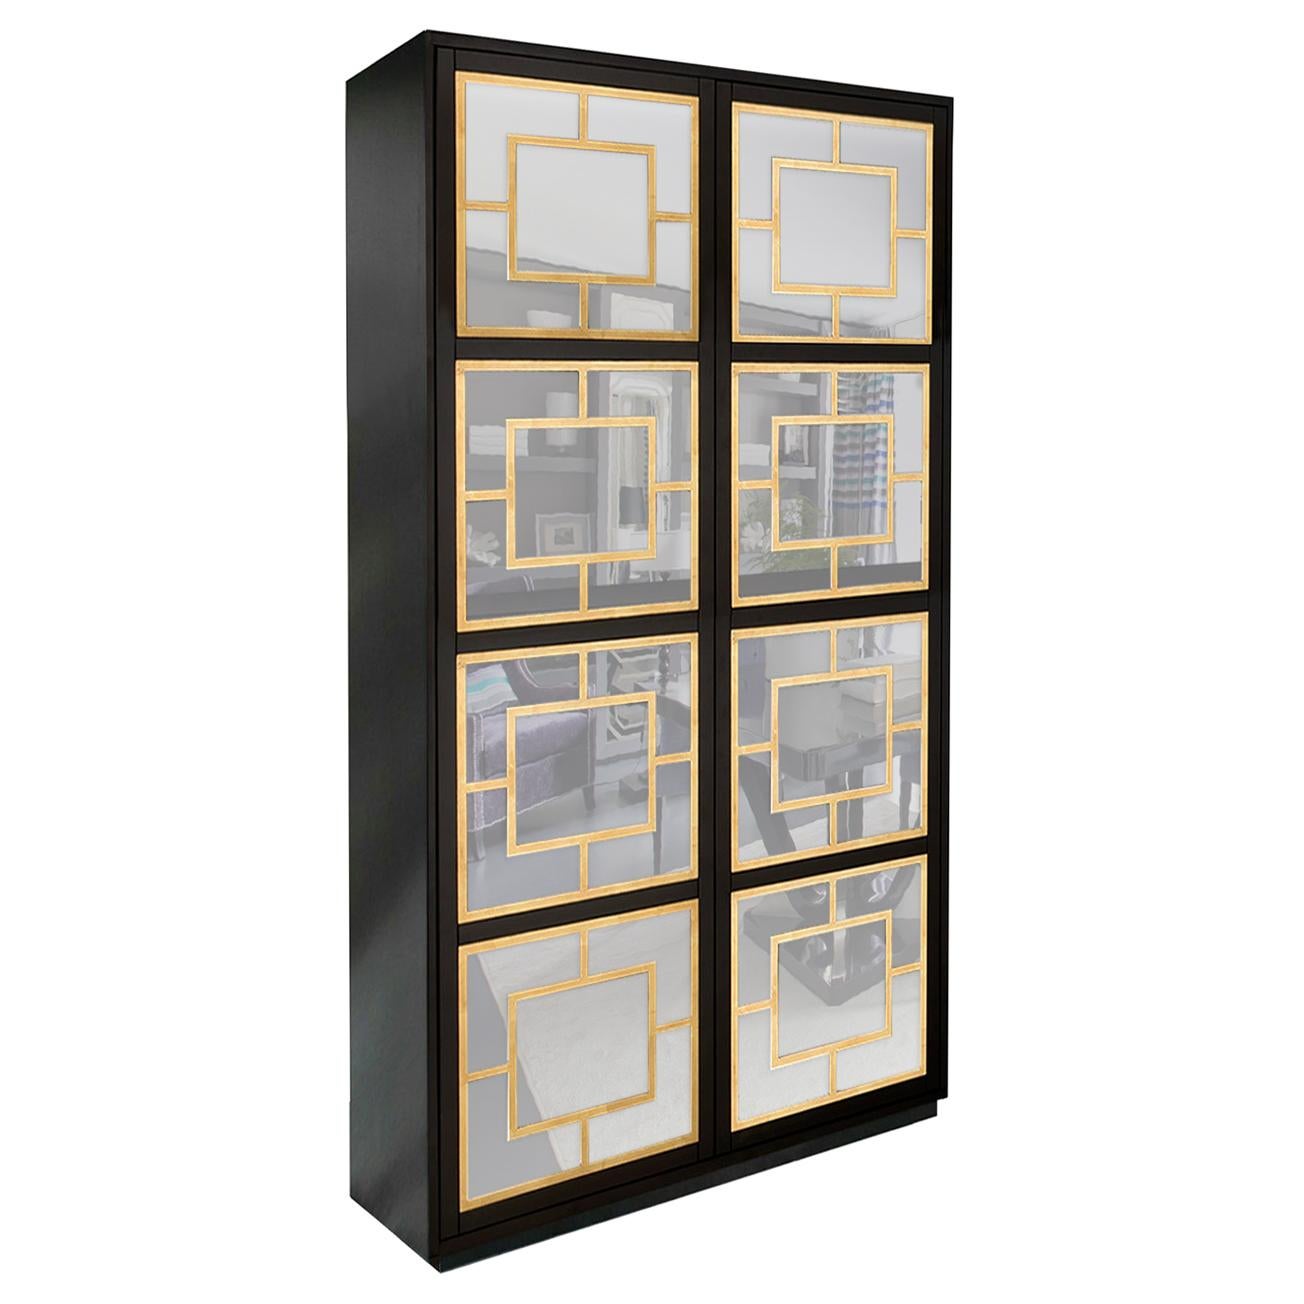 Isabella Costantini, Italy, Zoe Armoire D40 Mirrored Doors and Plinth Base For Sale